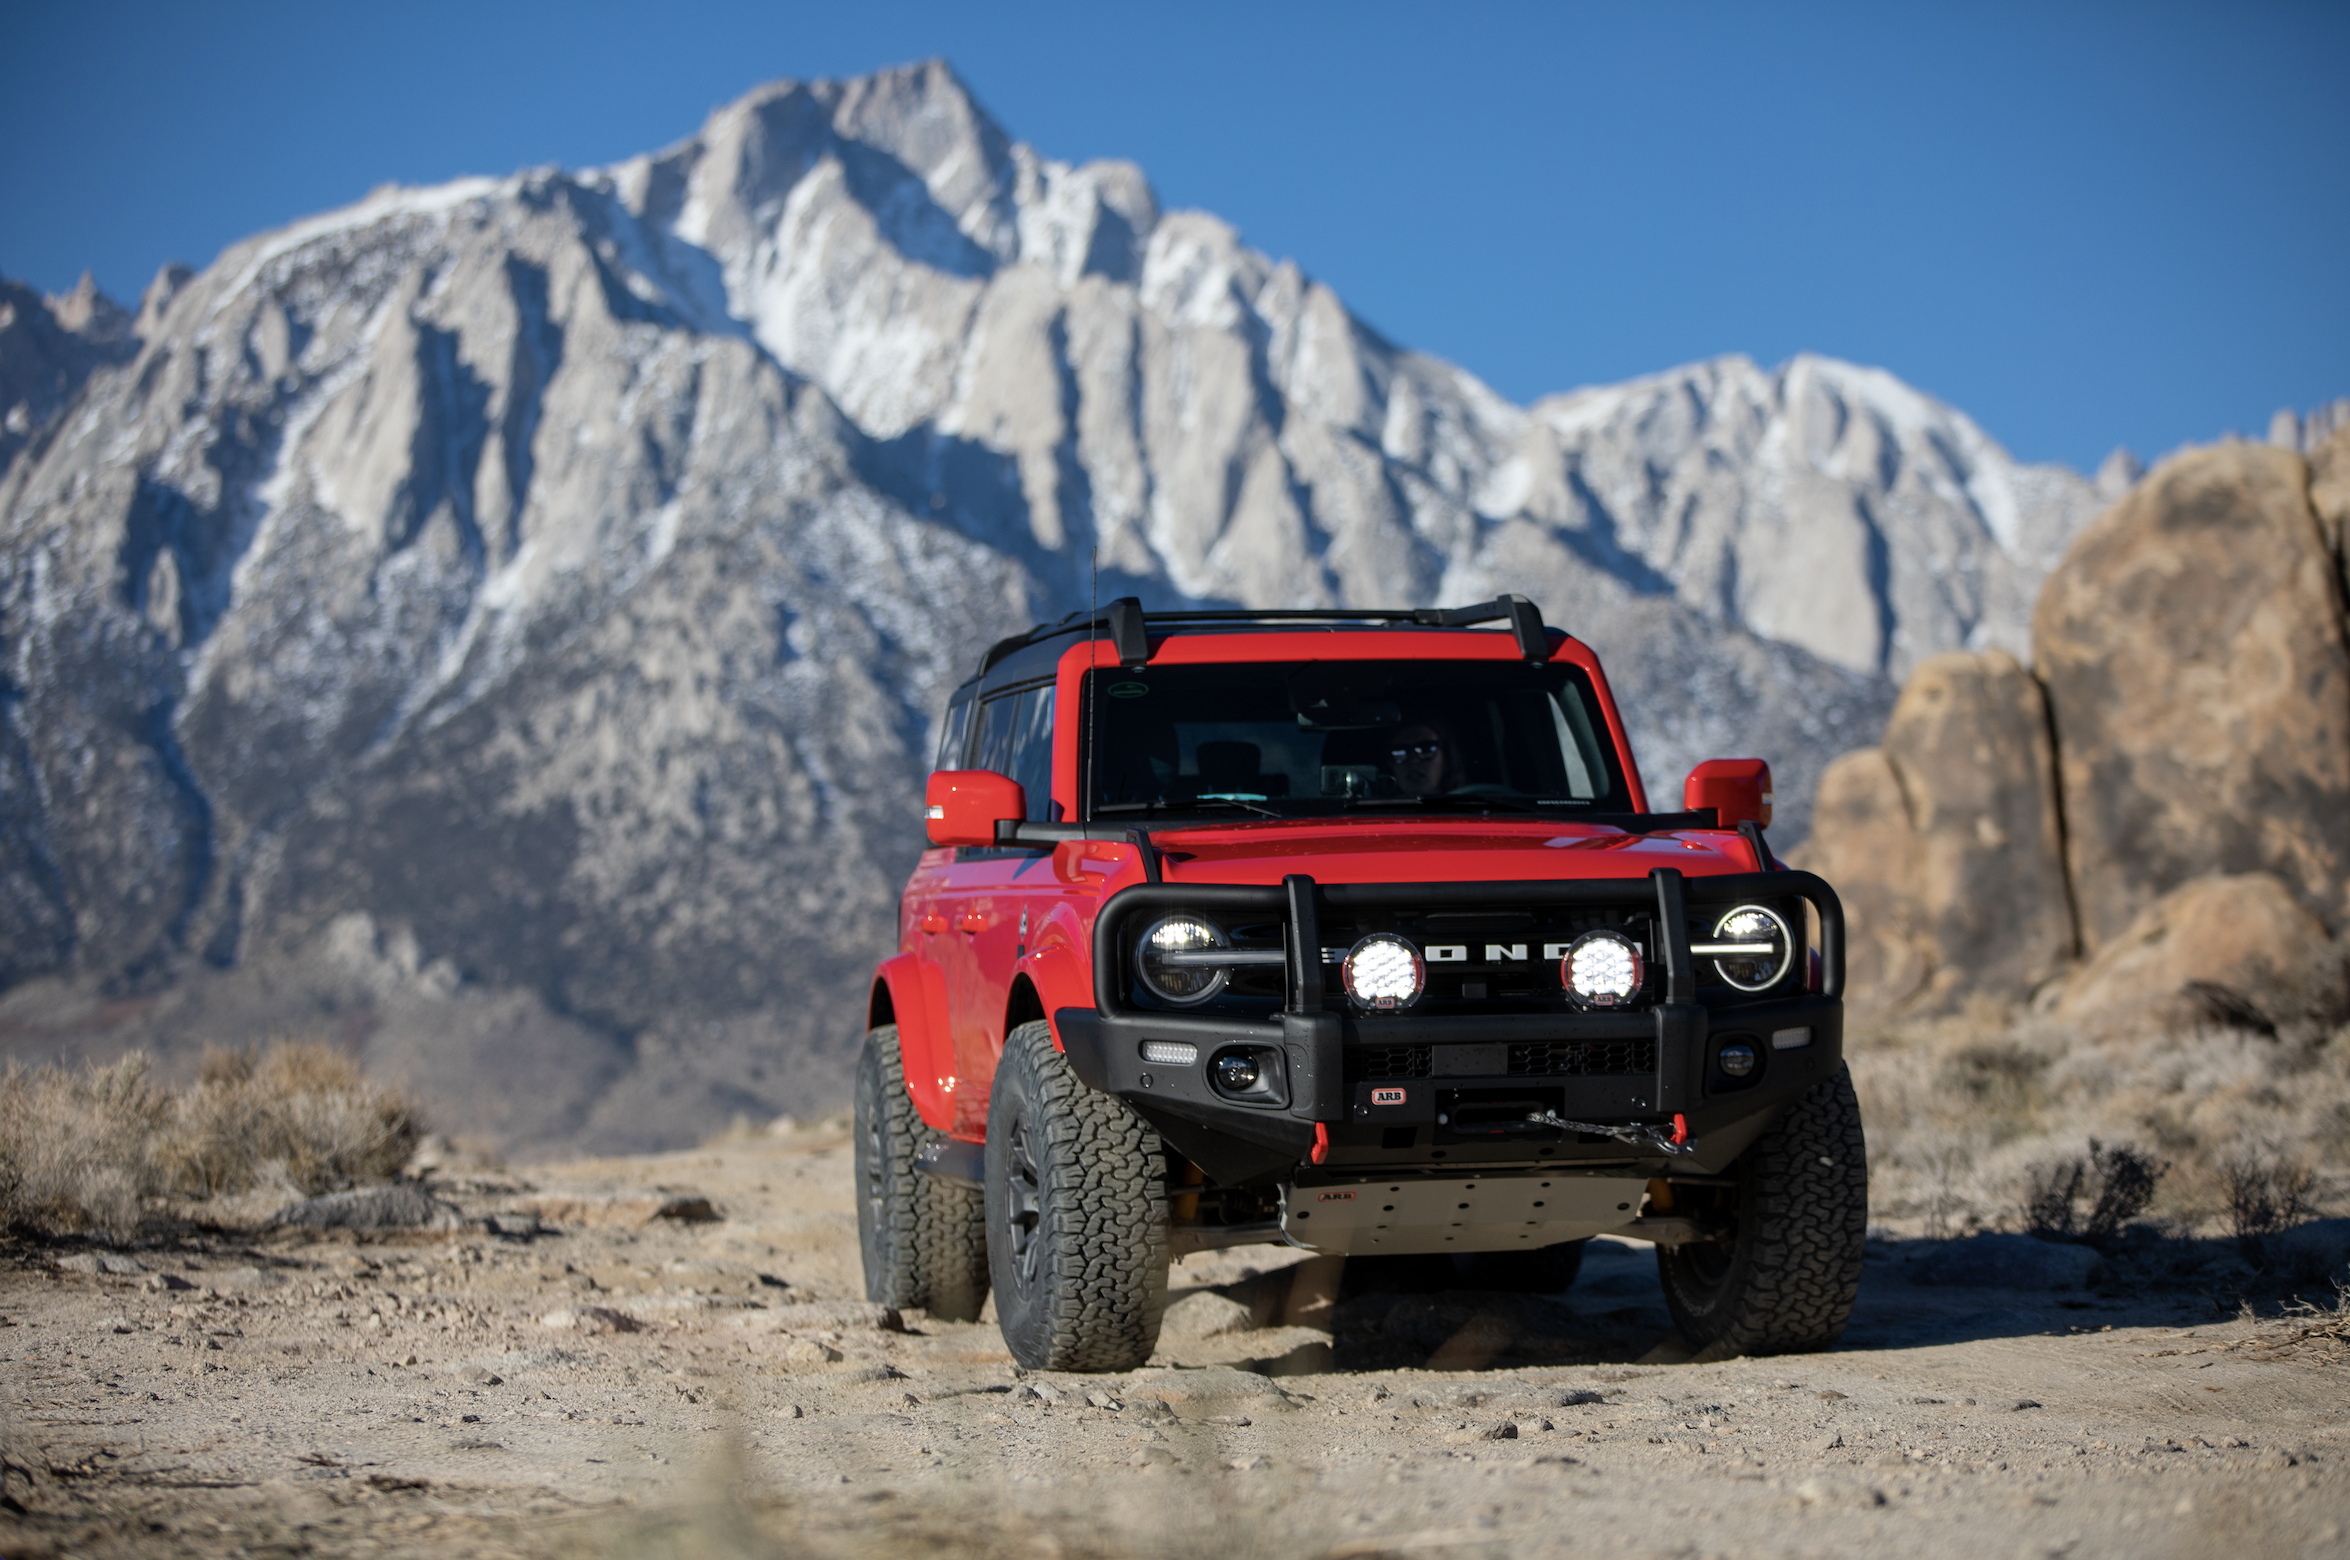 Ford Bronco Ford Bronco Gets The ARB Treatment: How To Improve On A Great Platform 01_arb-harryw